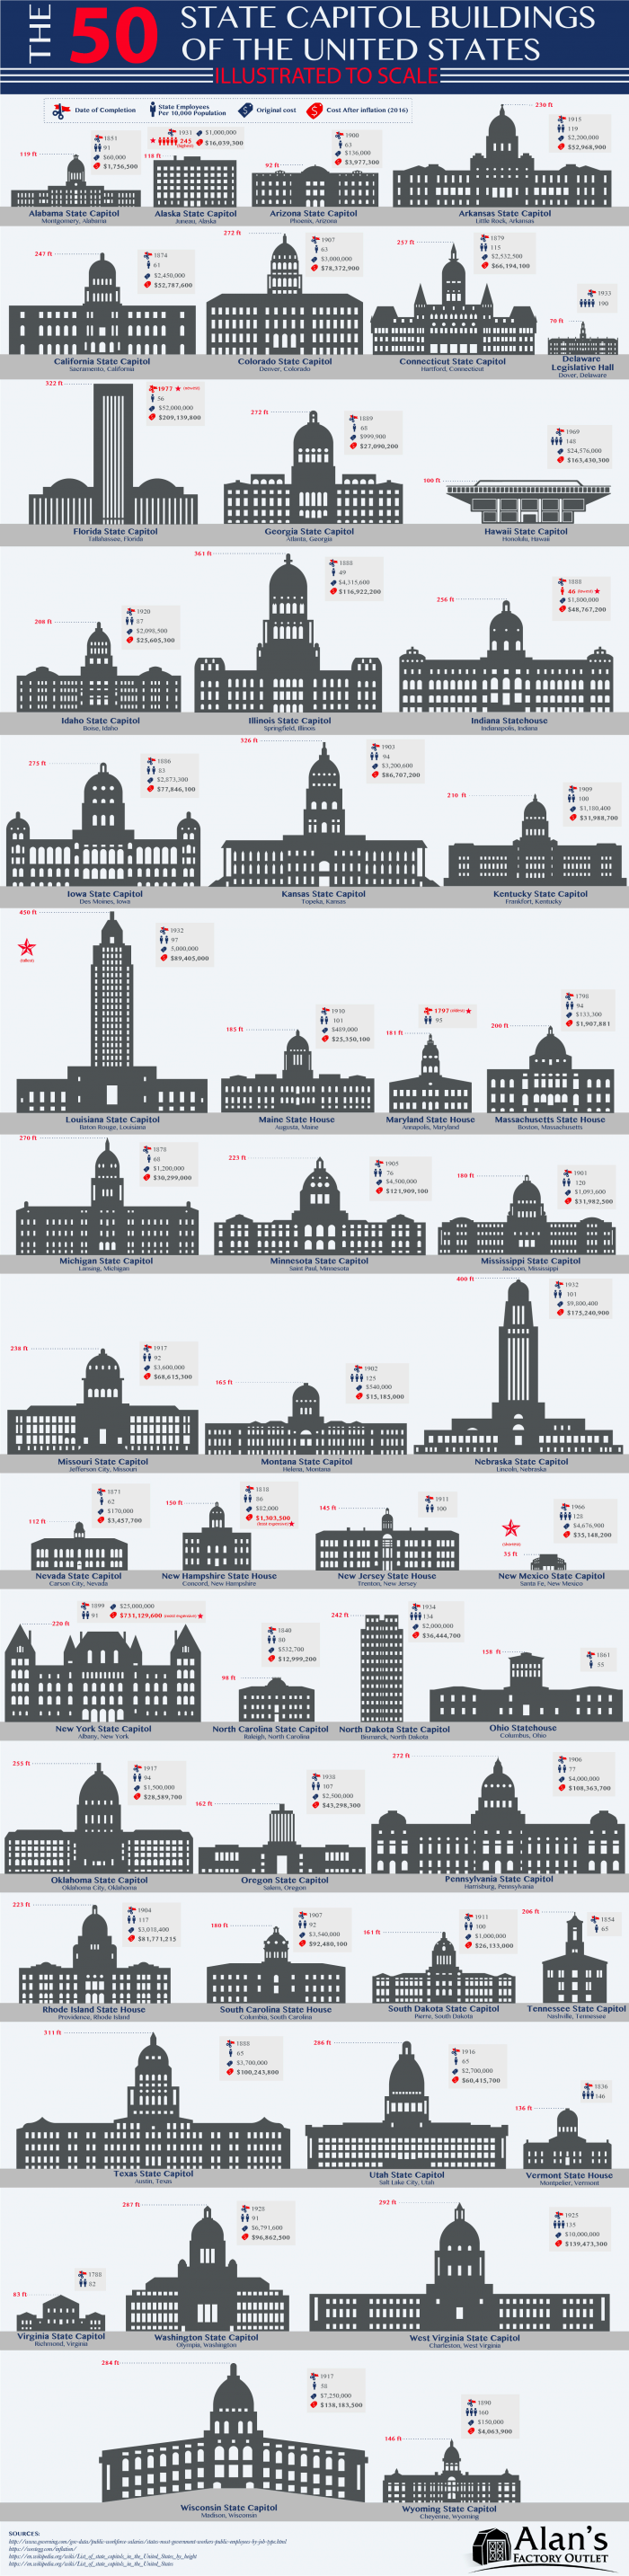 Infographic with all 50 State Capitol buildings illustrated to scale.